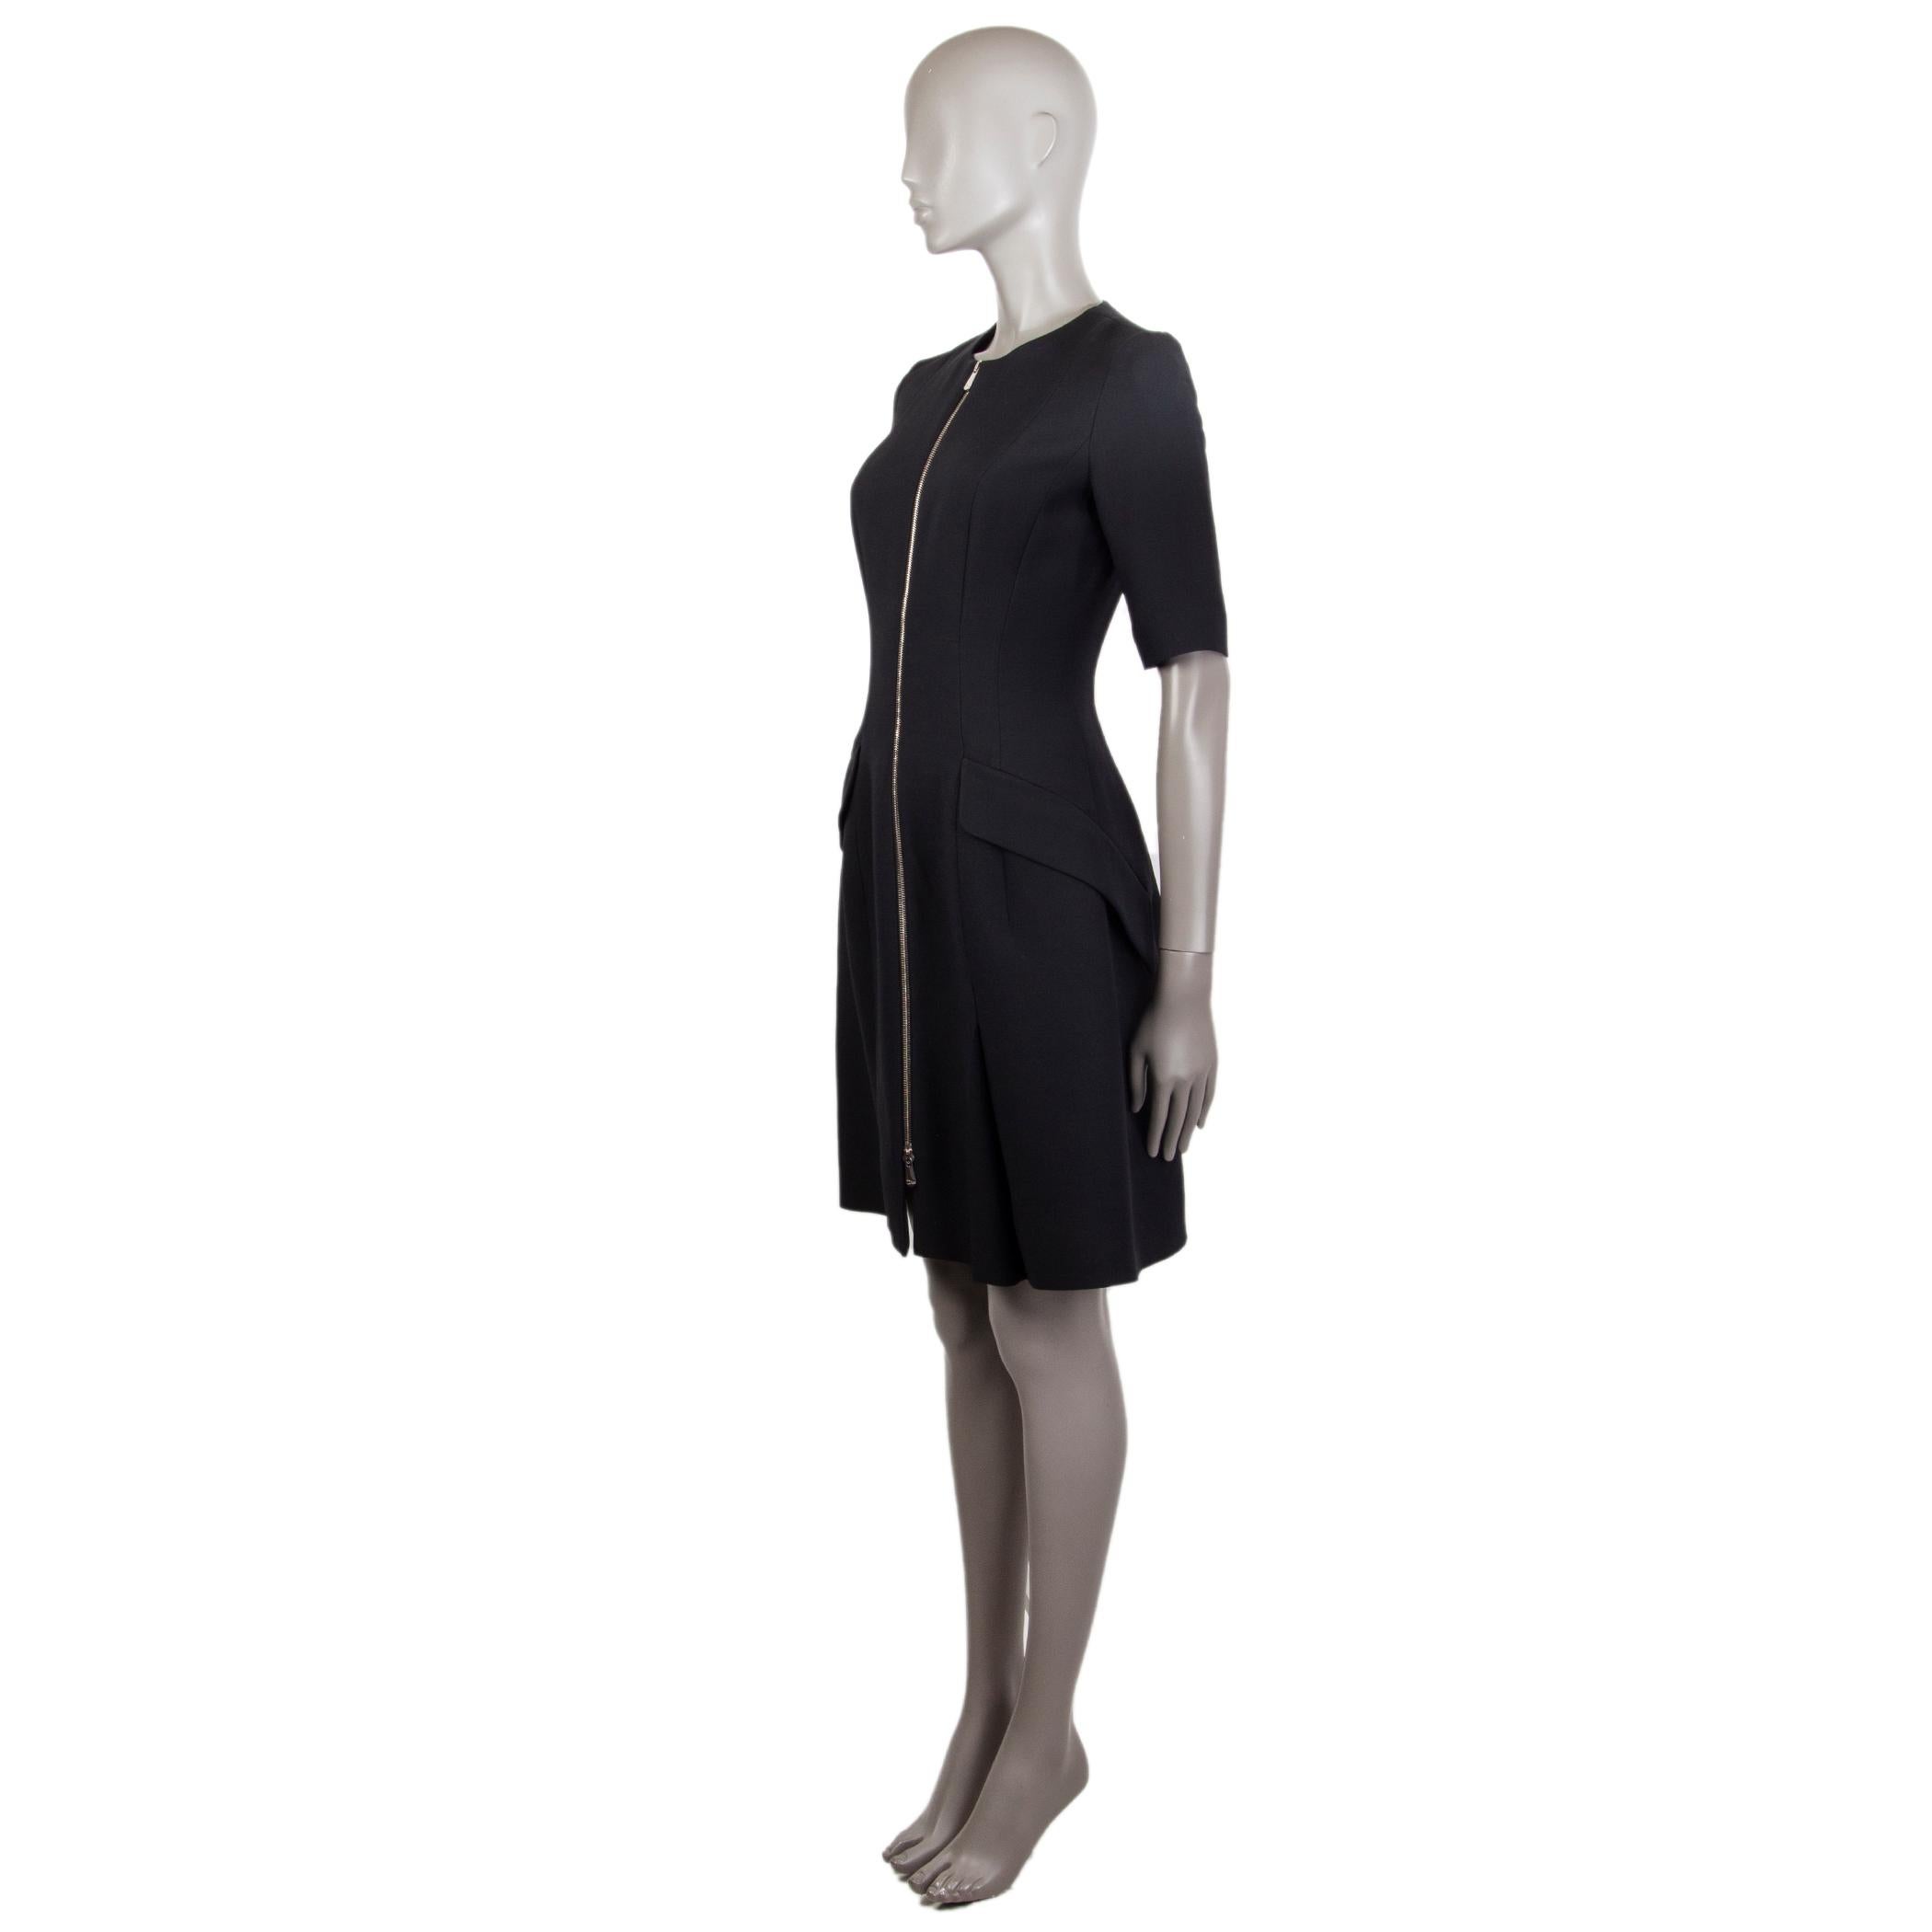 Christian Dior tailored sheath dress in black viscose blend (assumed as tag is missing) with a round neck. Has two decorative flap pockets on the front. Closes on the front with a metal tone zipper. Lined in silk (assumed as tag is missing). Fabric